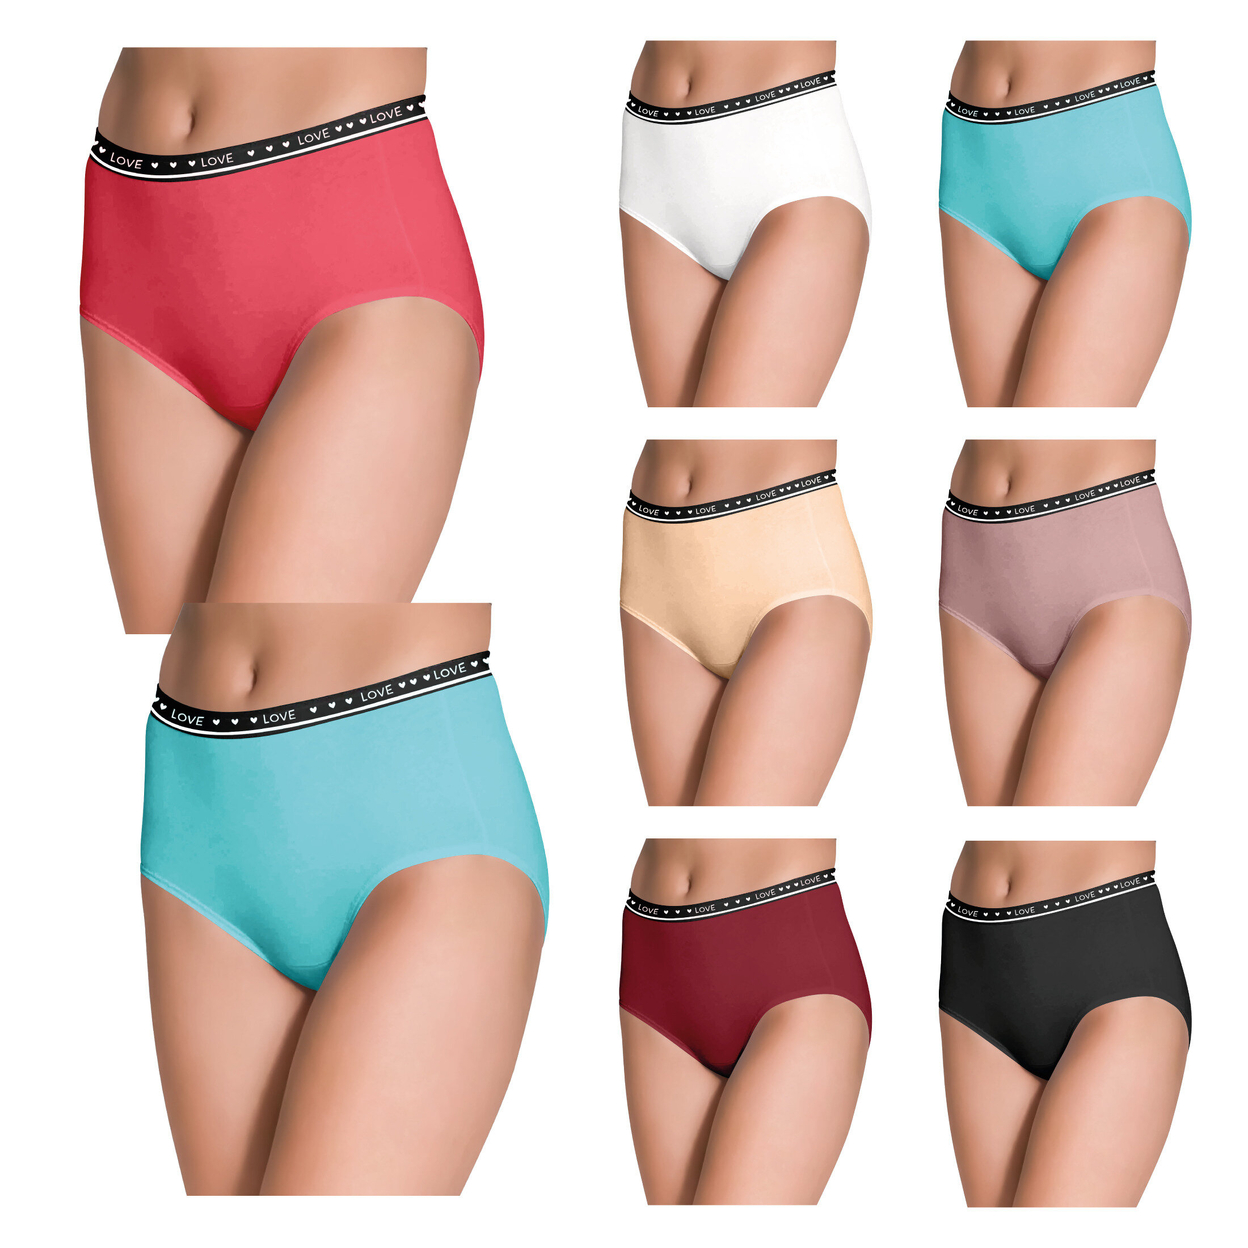 5-Pack: Women's Ultra Soft Moisture Wicking Panties Cotton Perfect Fit Underwear (Plus Sizes Available) - Small